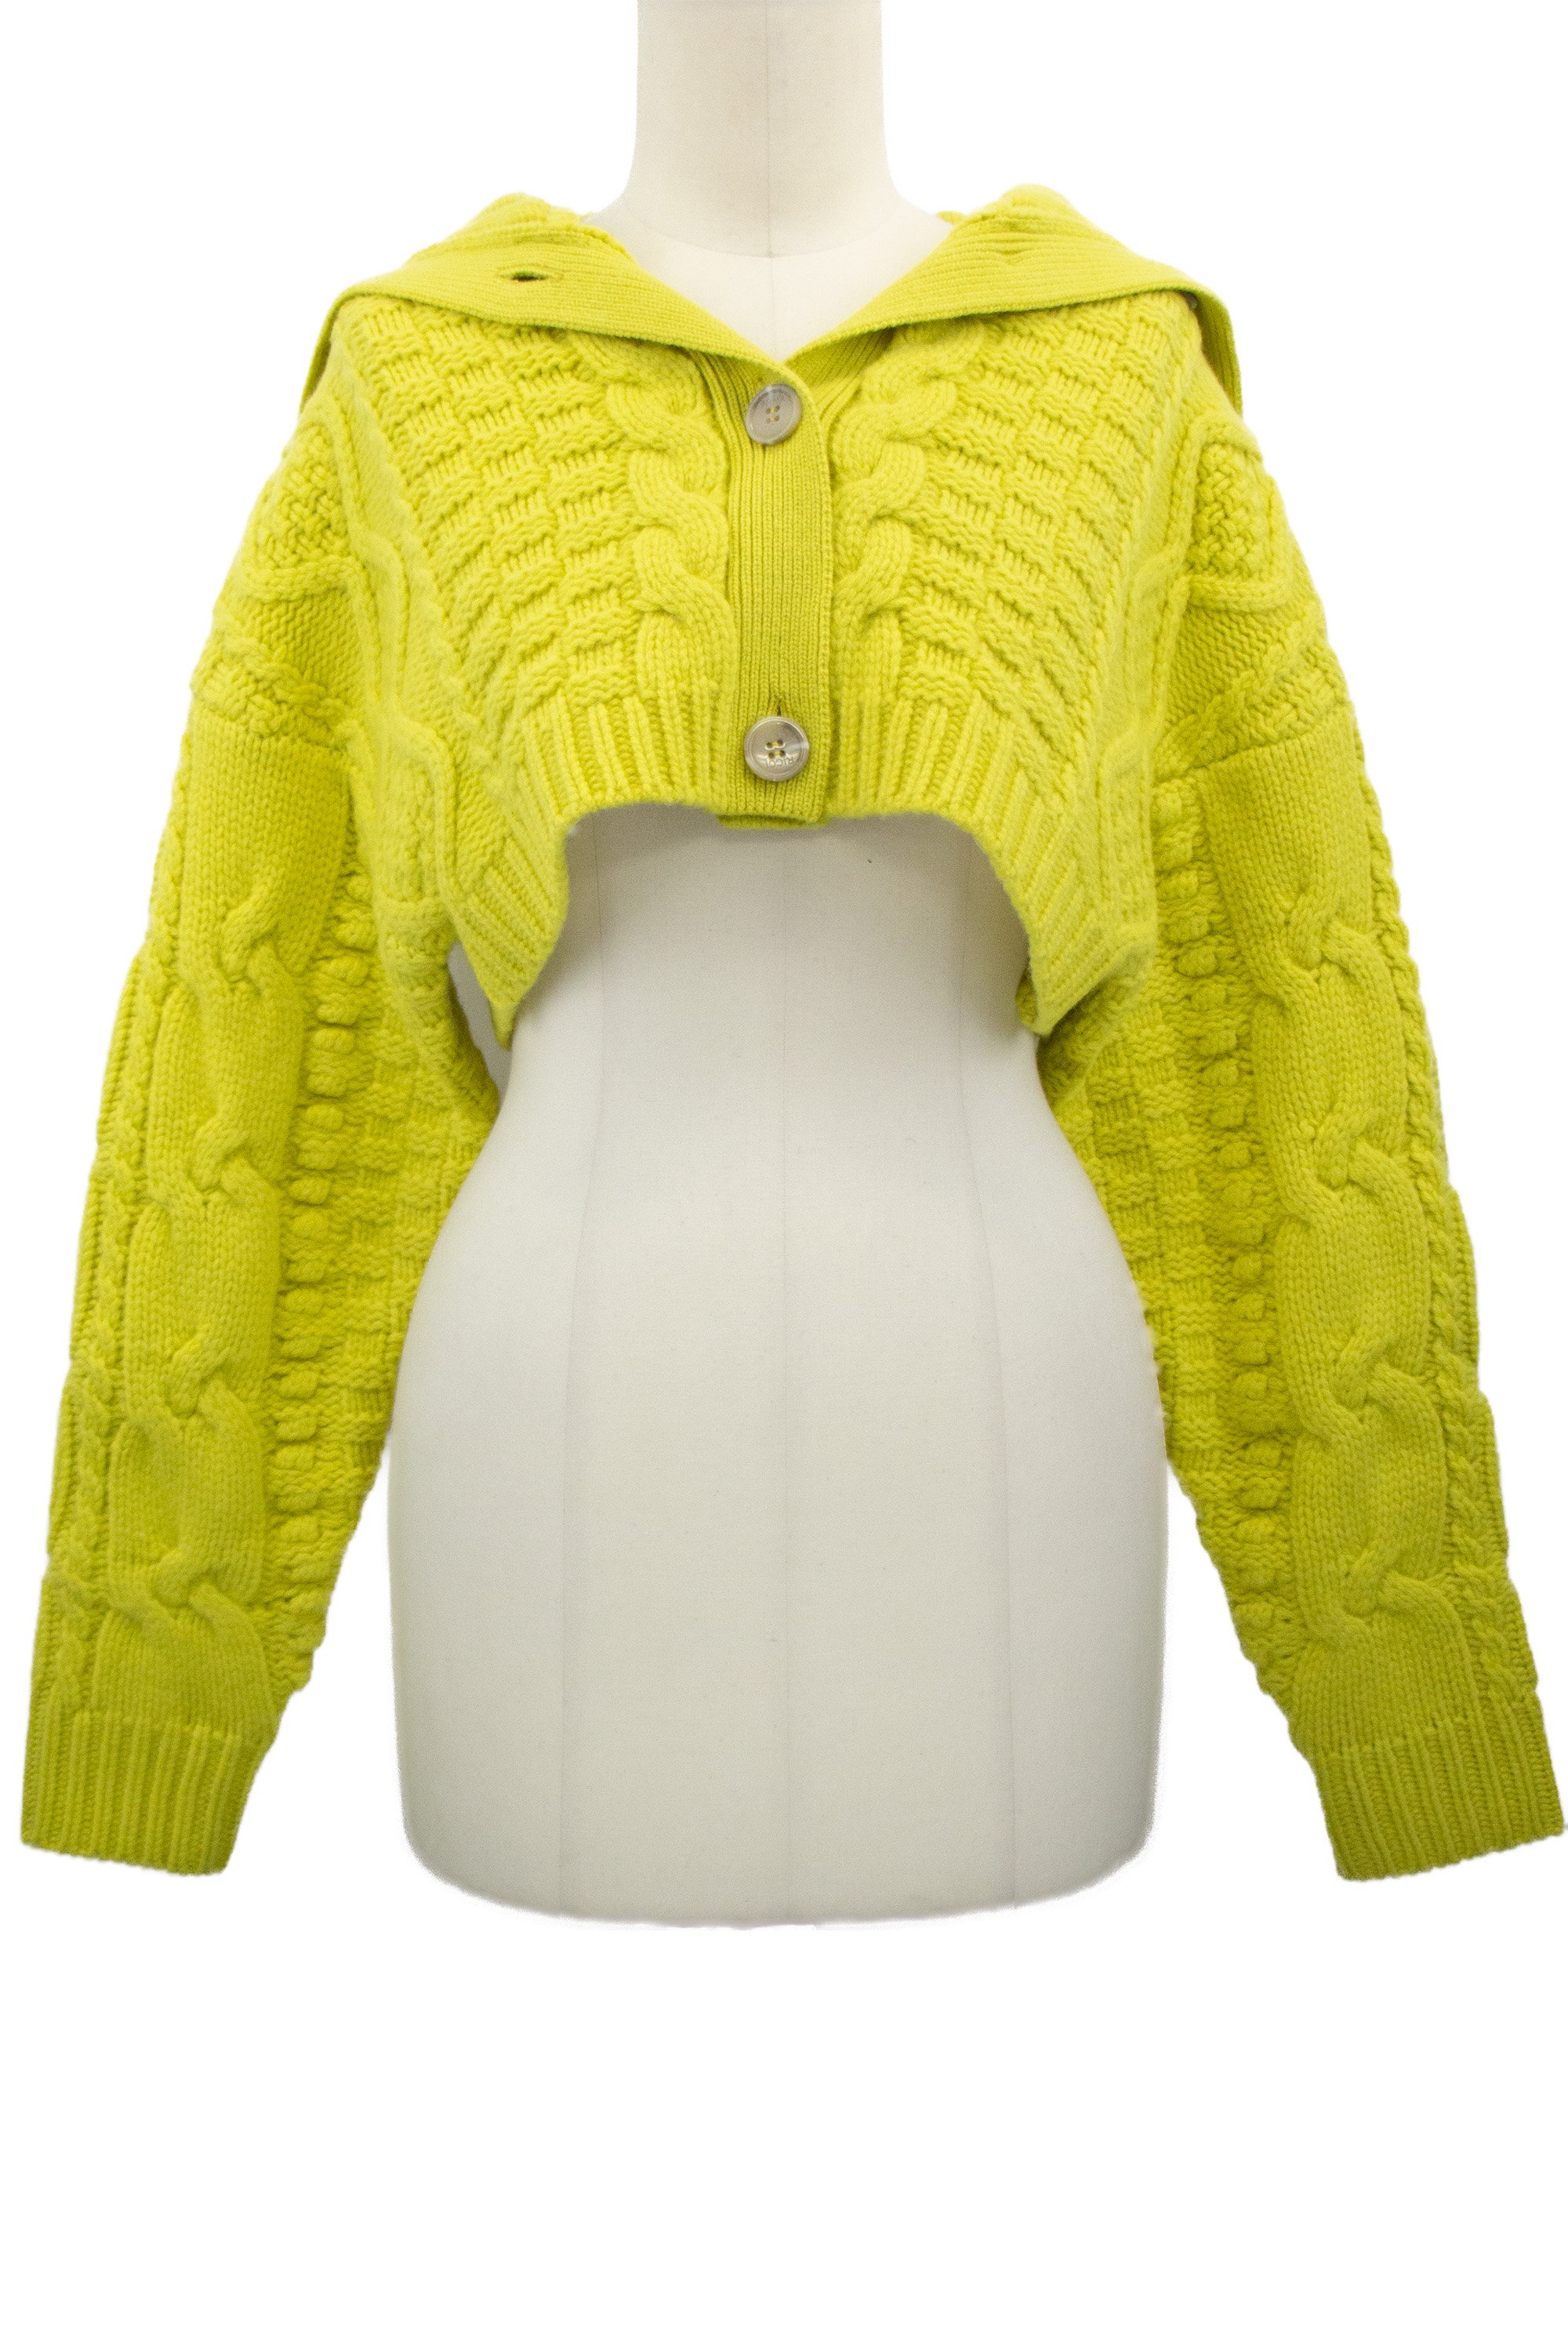 <img class='new_mark_img1' src='https://img.shop-pro.jp/img/new/icons8.gif' style='border:none;display:inline;margin:0px;padding:0px;width:auto;' />NINARICCI turtle neck cable cardigan